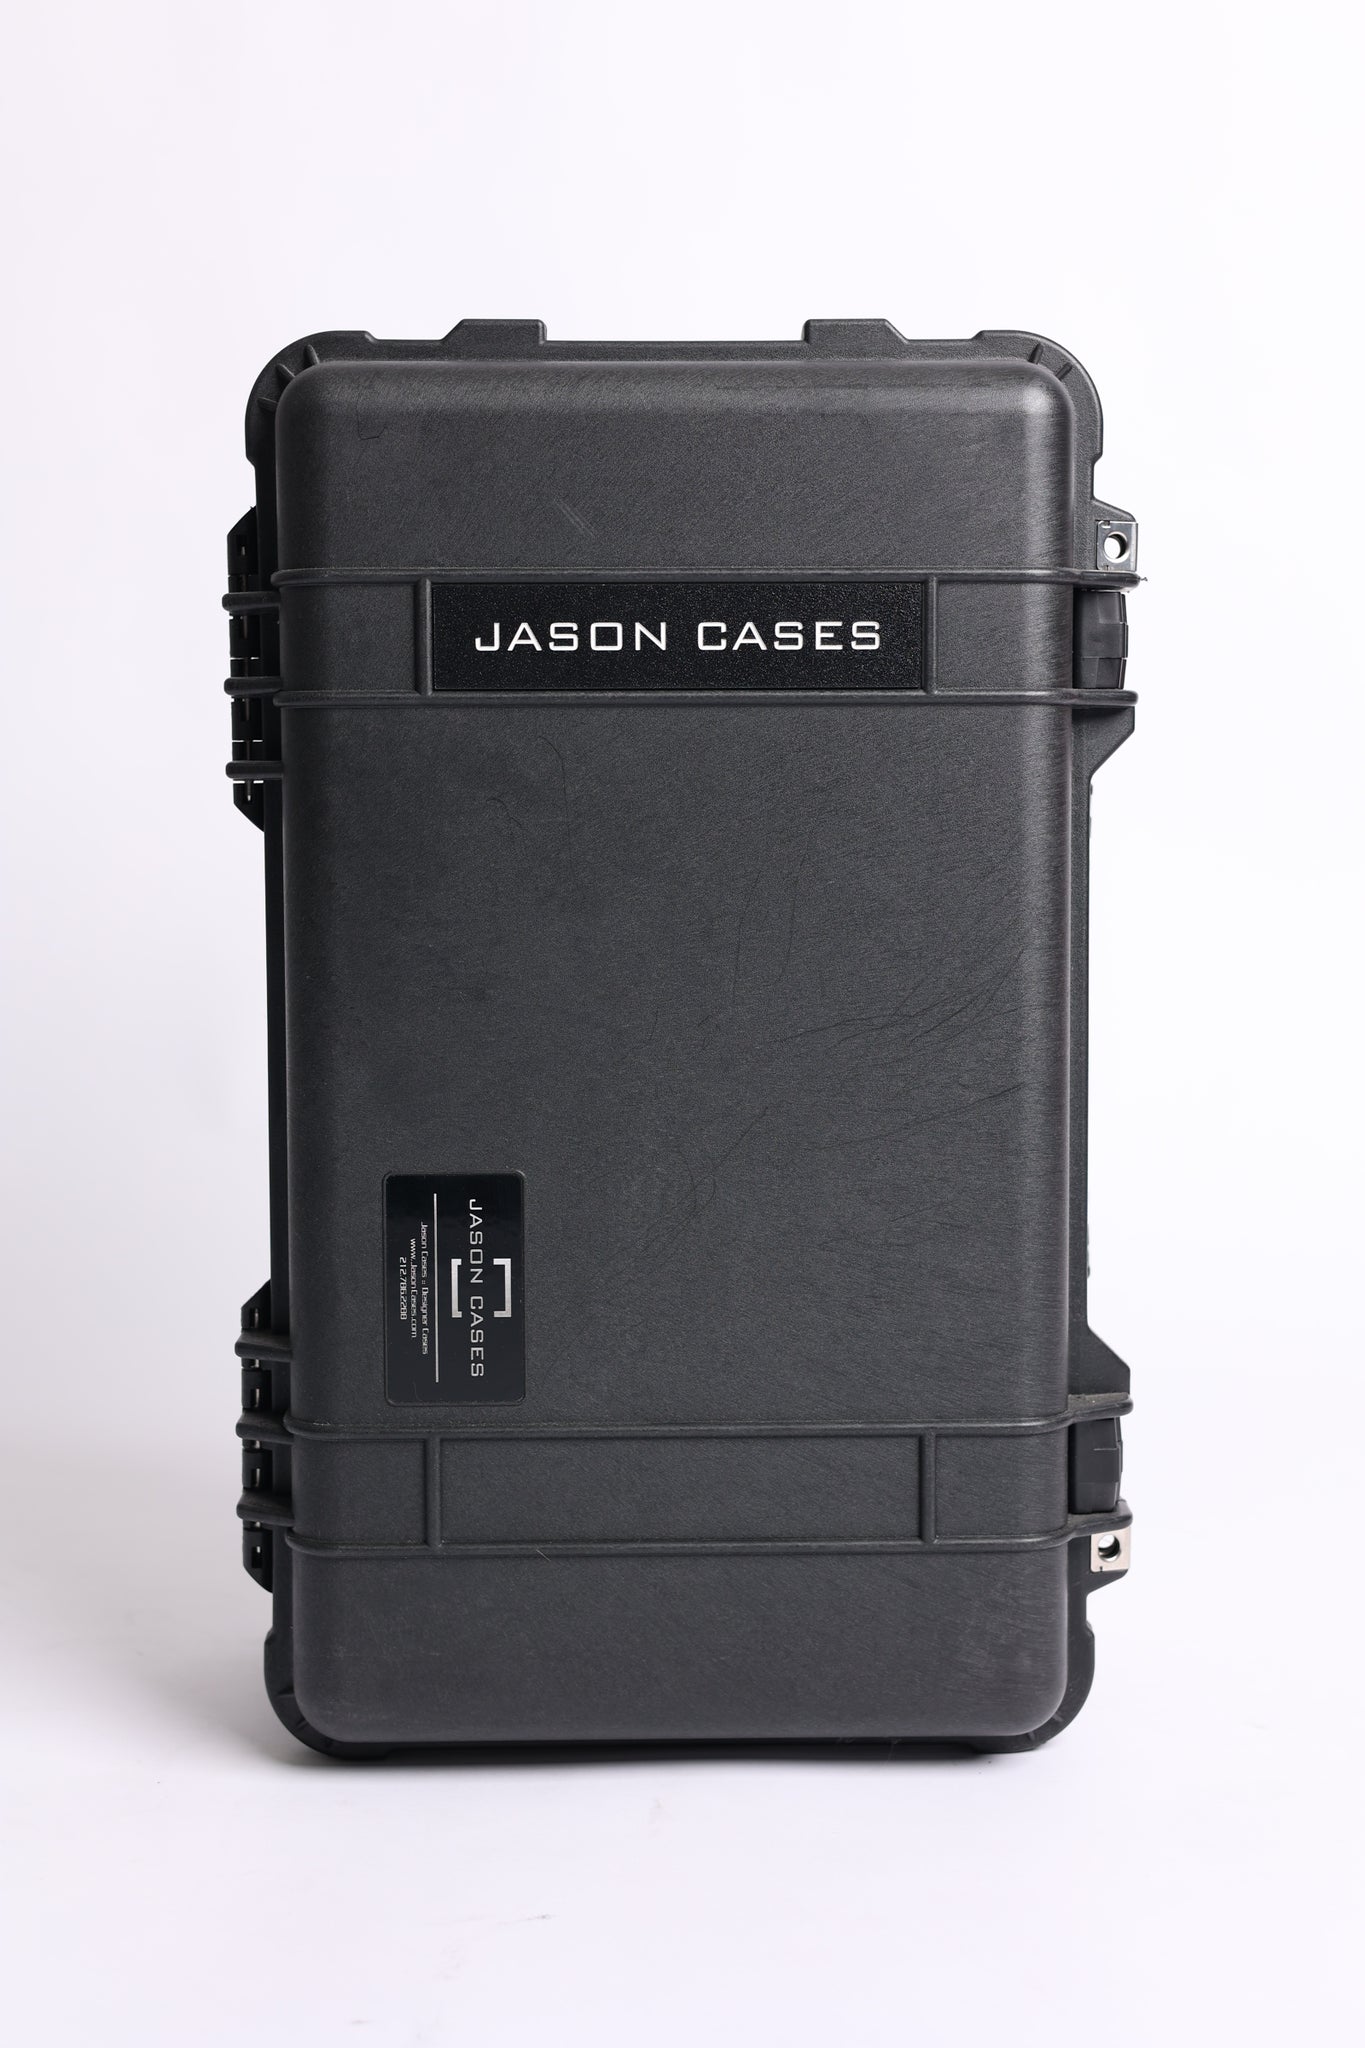 Jason Cases Hard Case For Camcorders